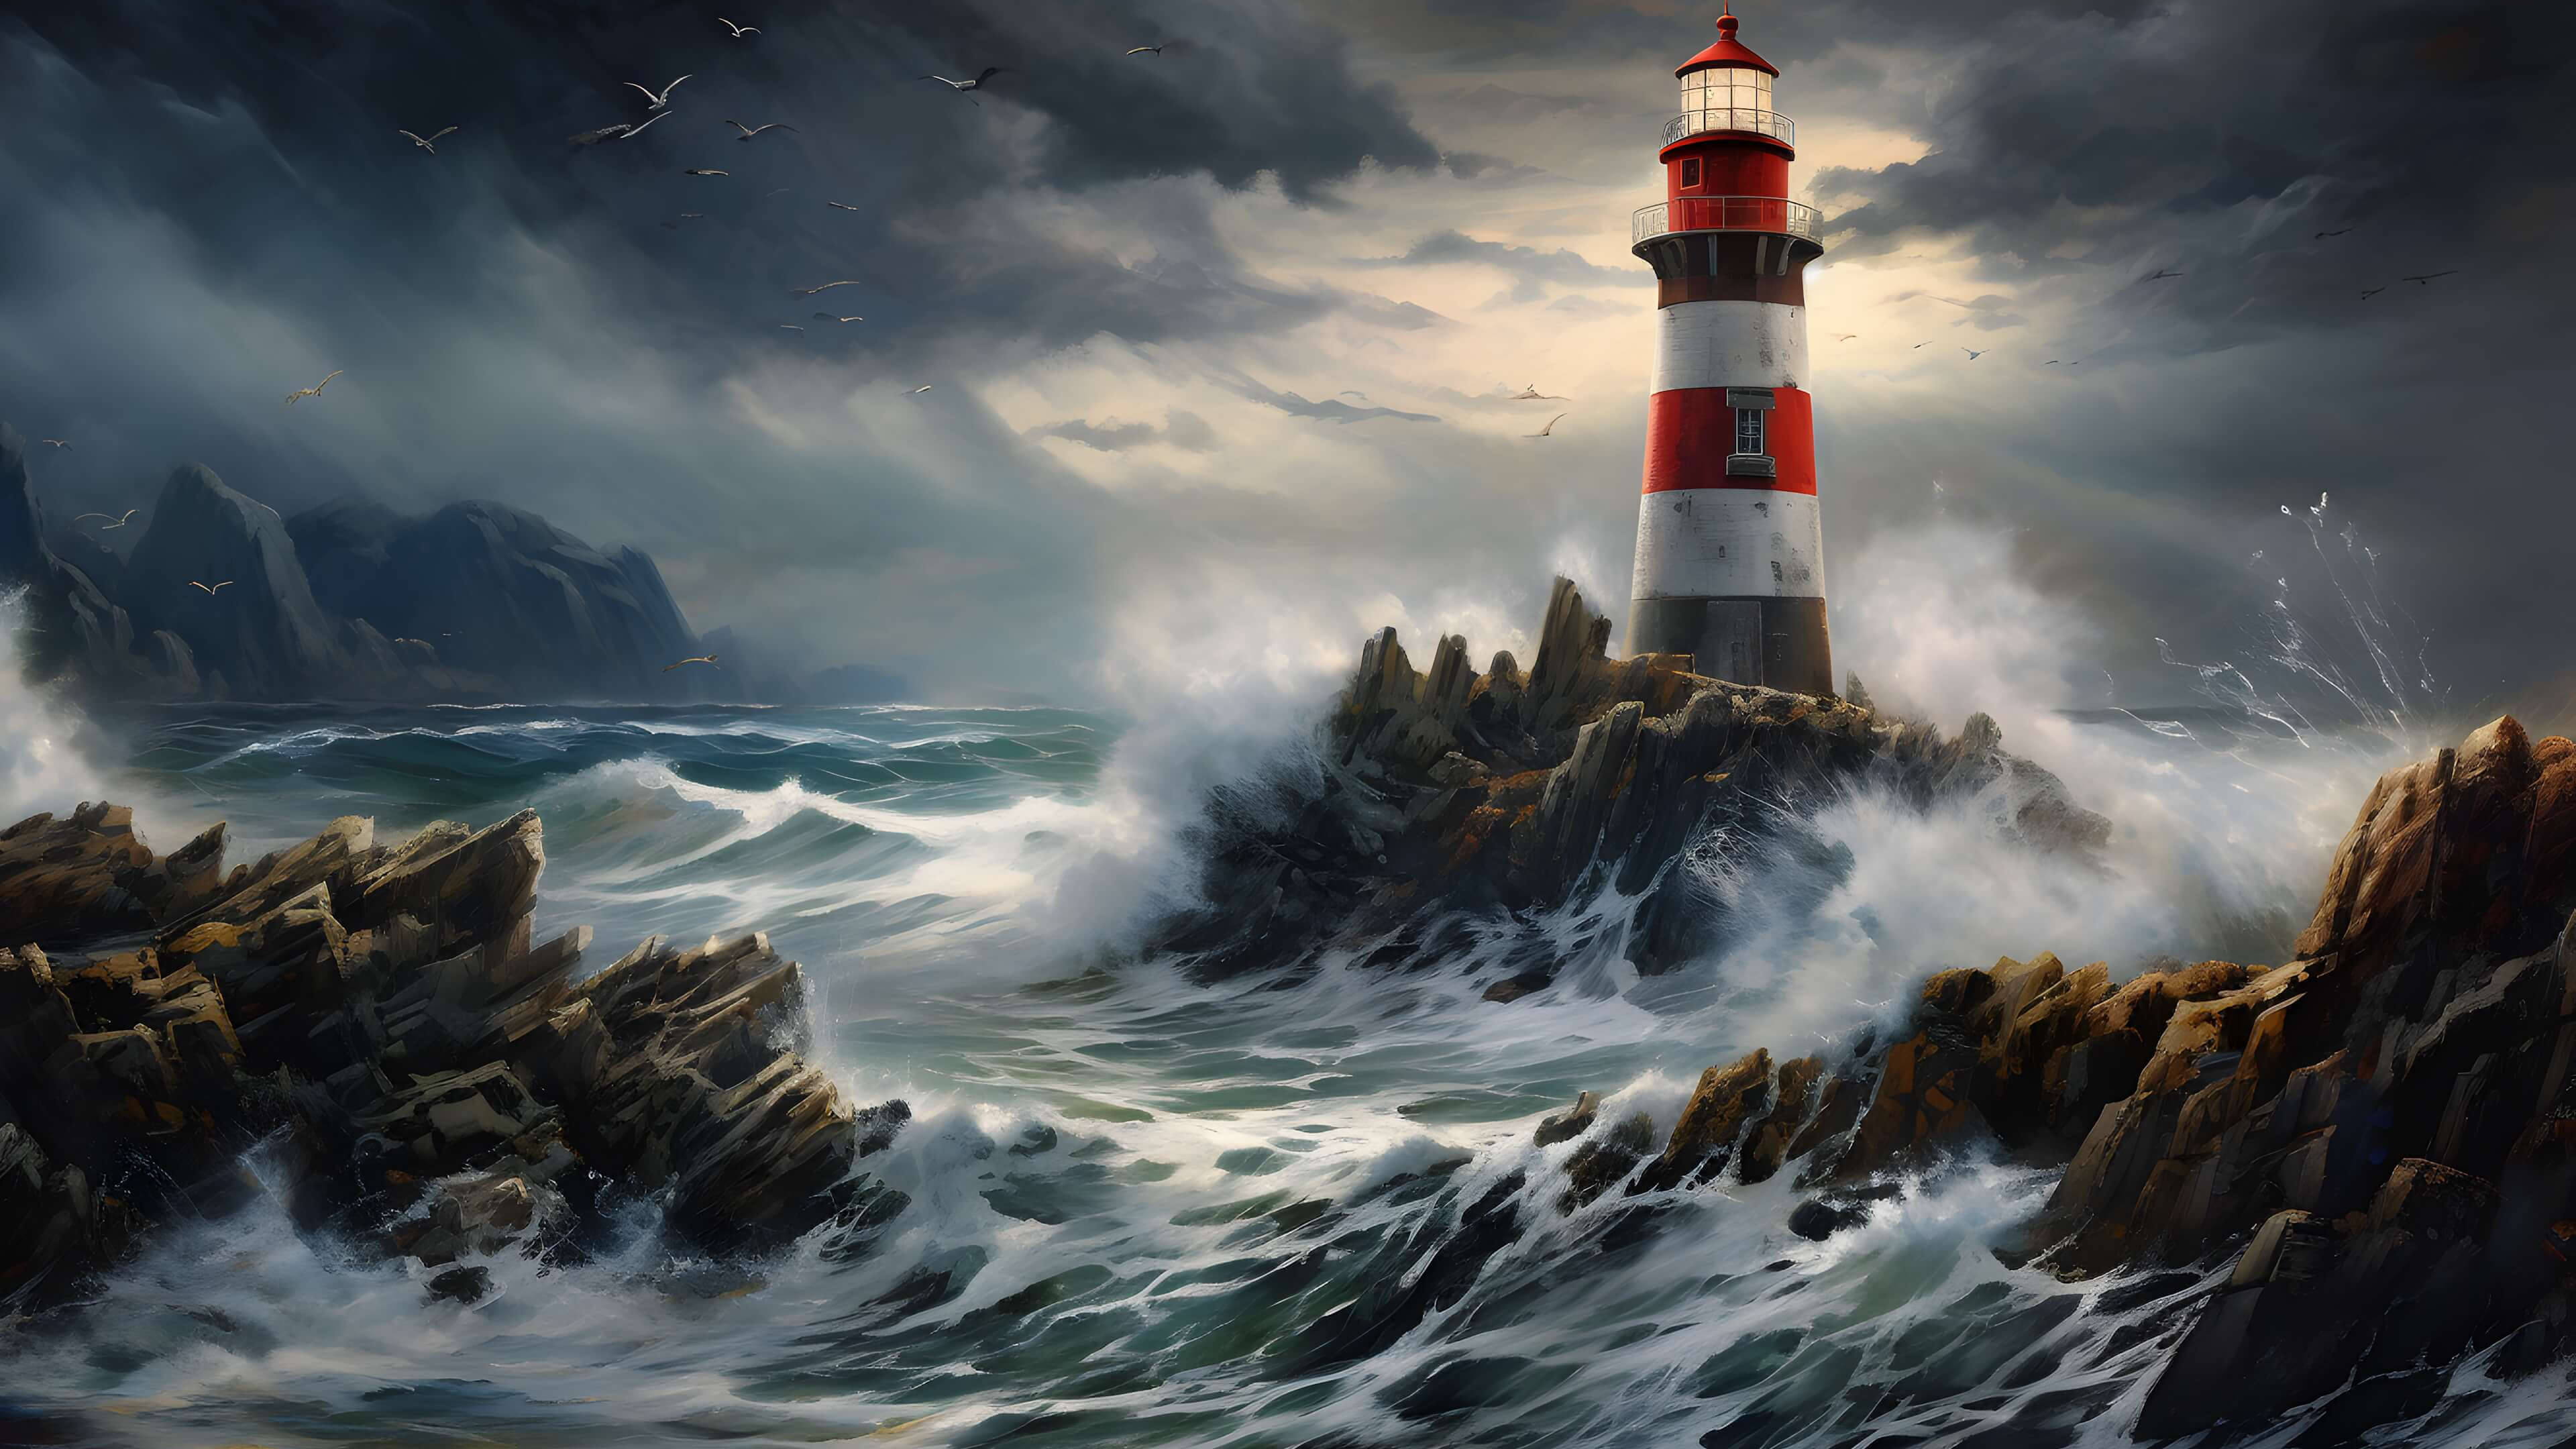 Lighthouse in the ocean waves wallpaper 3840x2160